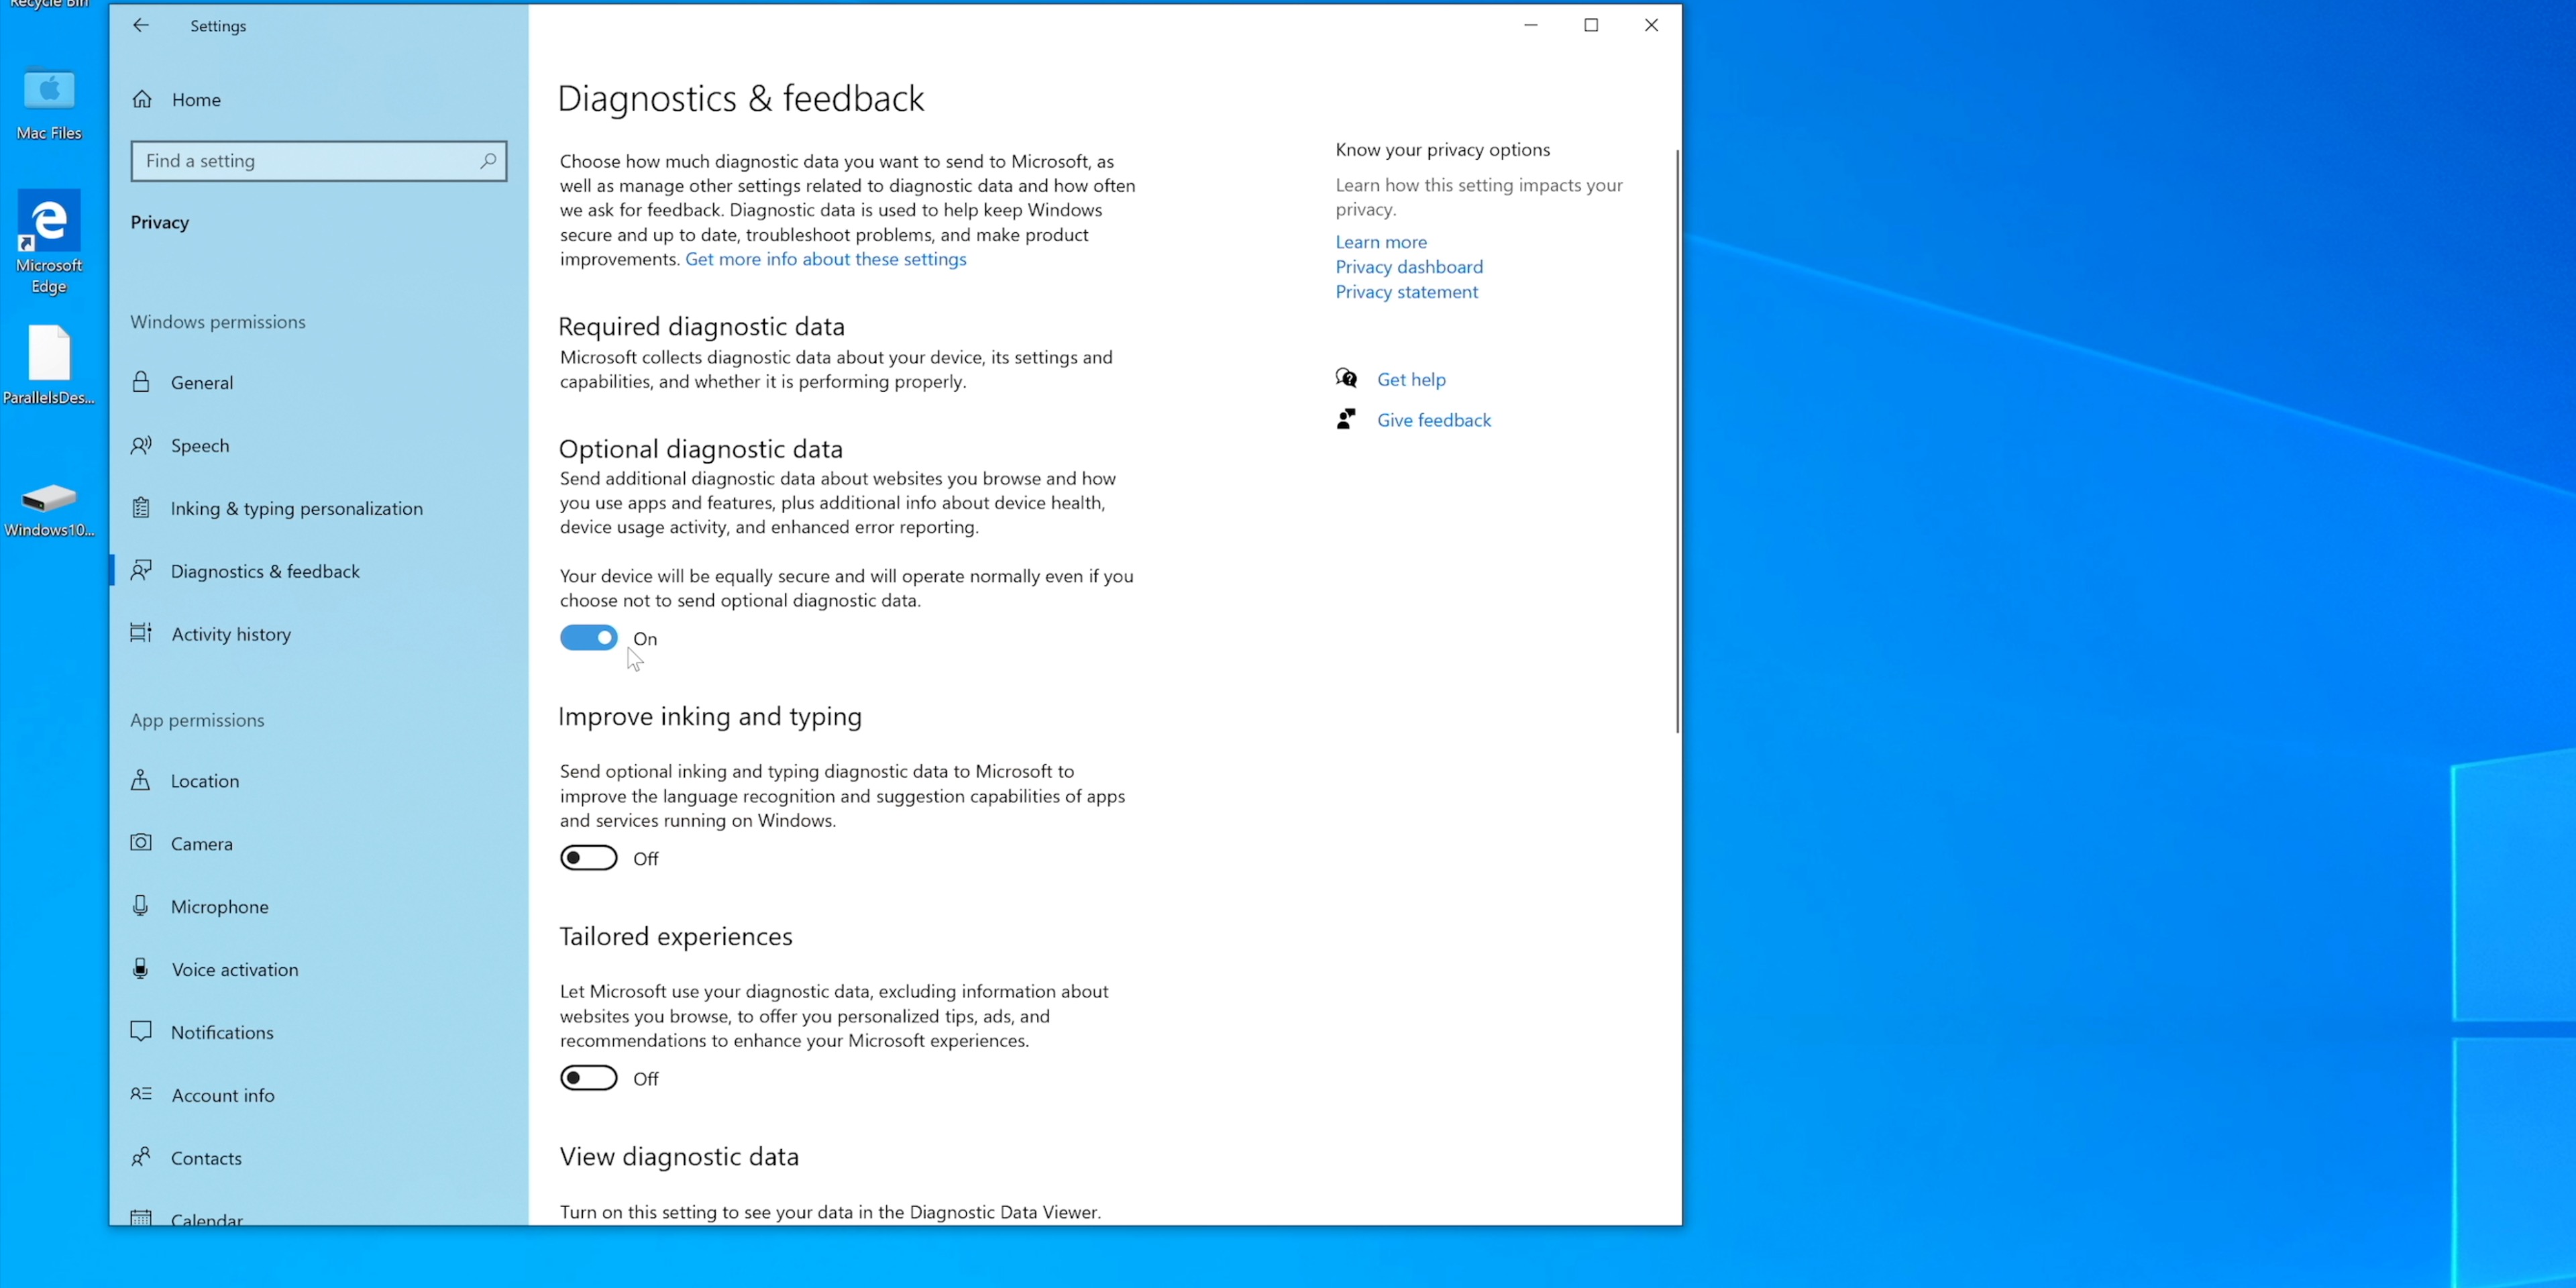 windows 10 pro insider preview any good